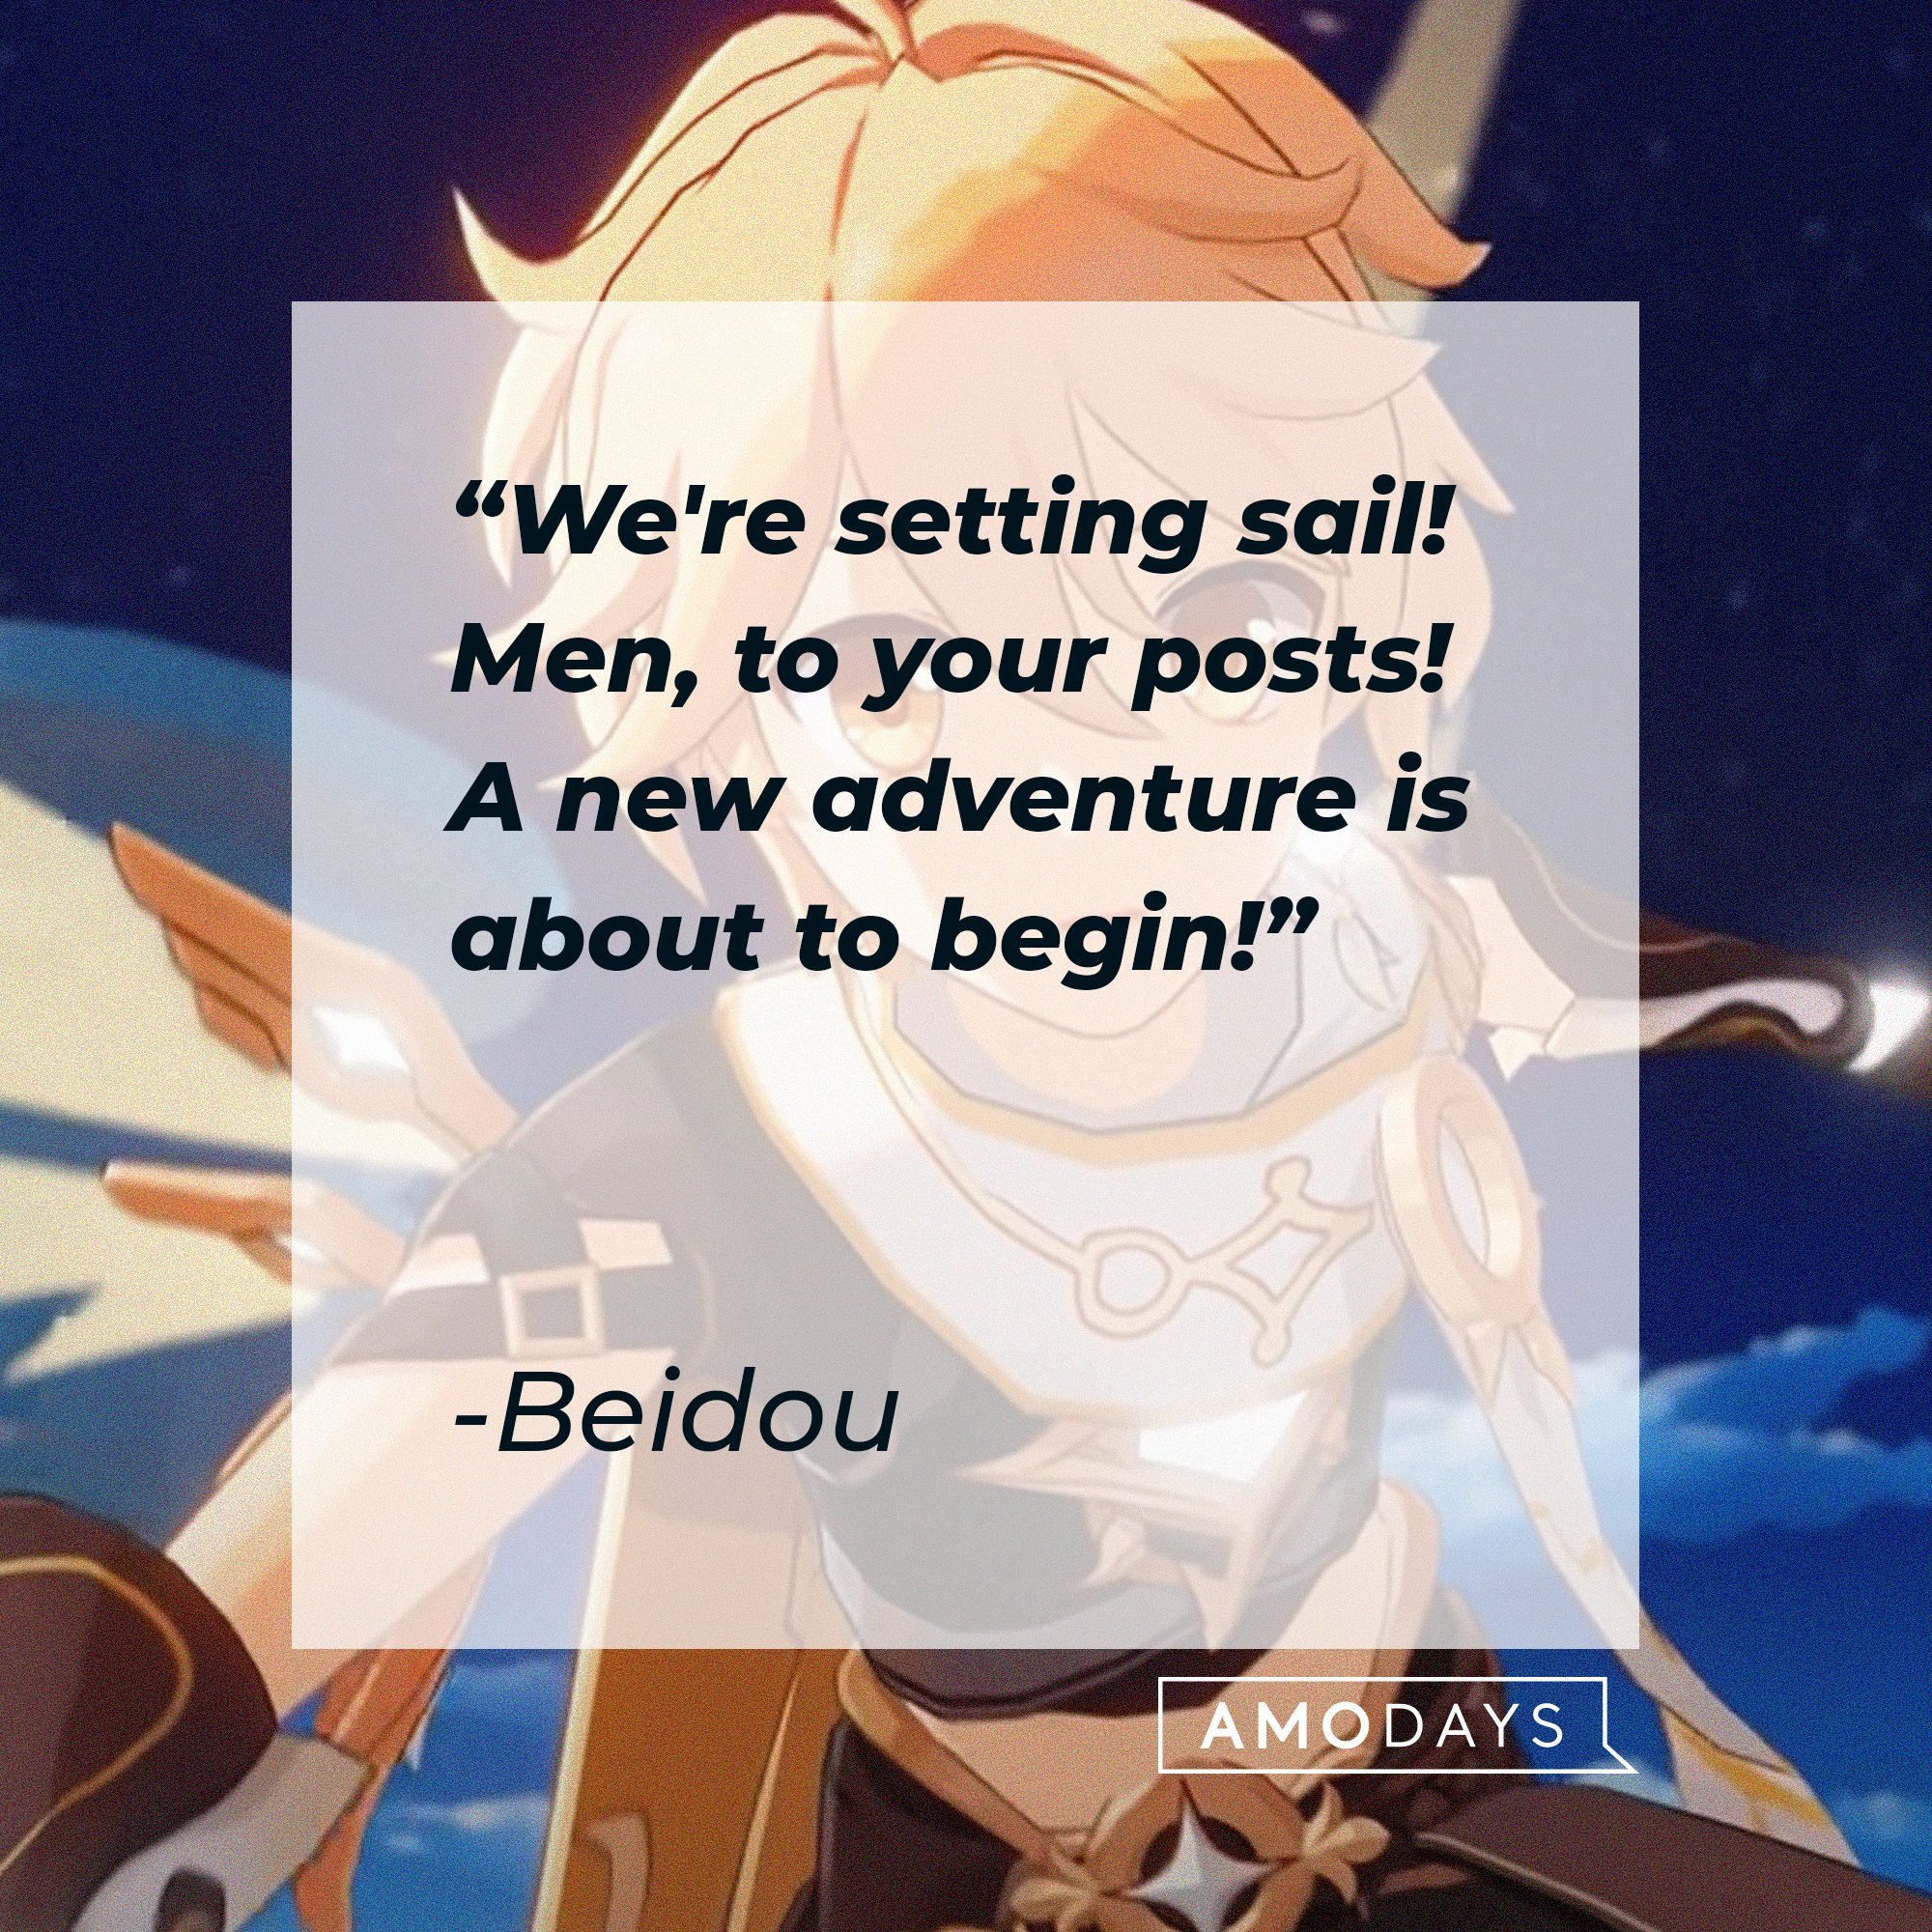 Beidou's quote: "We're setting sail! Men, to your posts! A new adventure is about to begin!” | Image: AmoDays